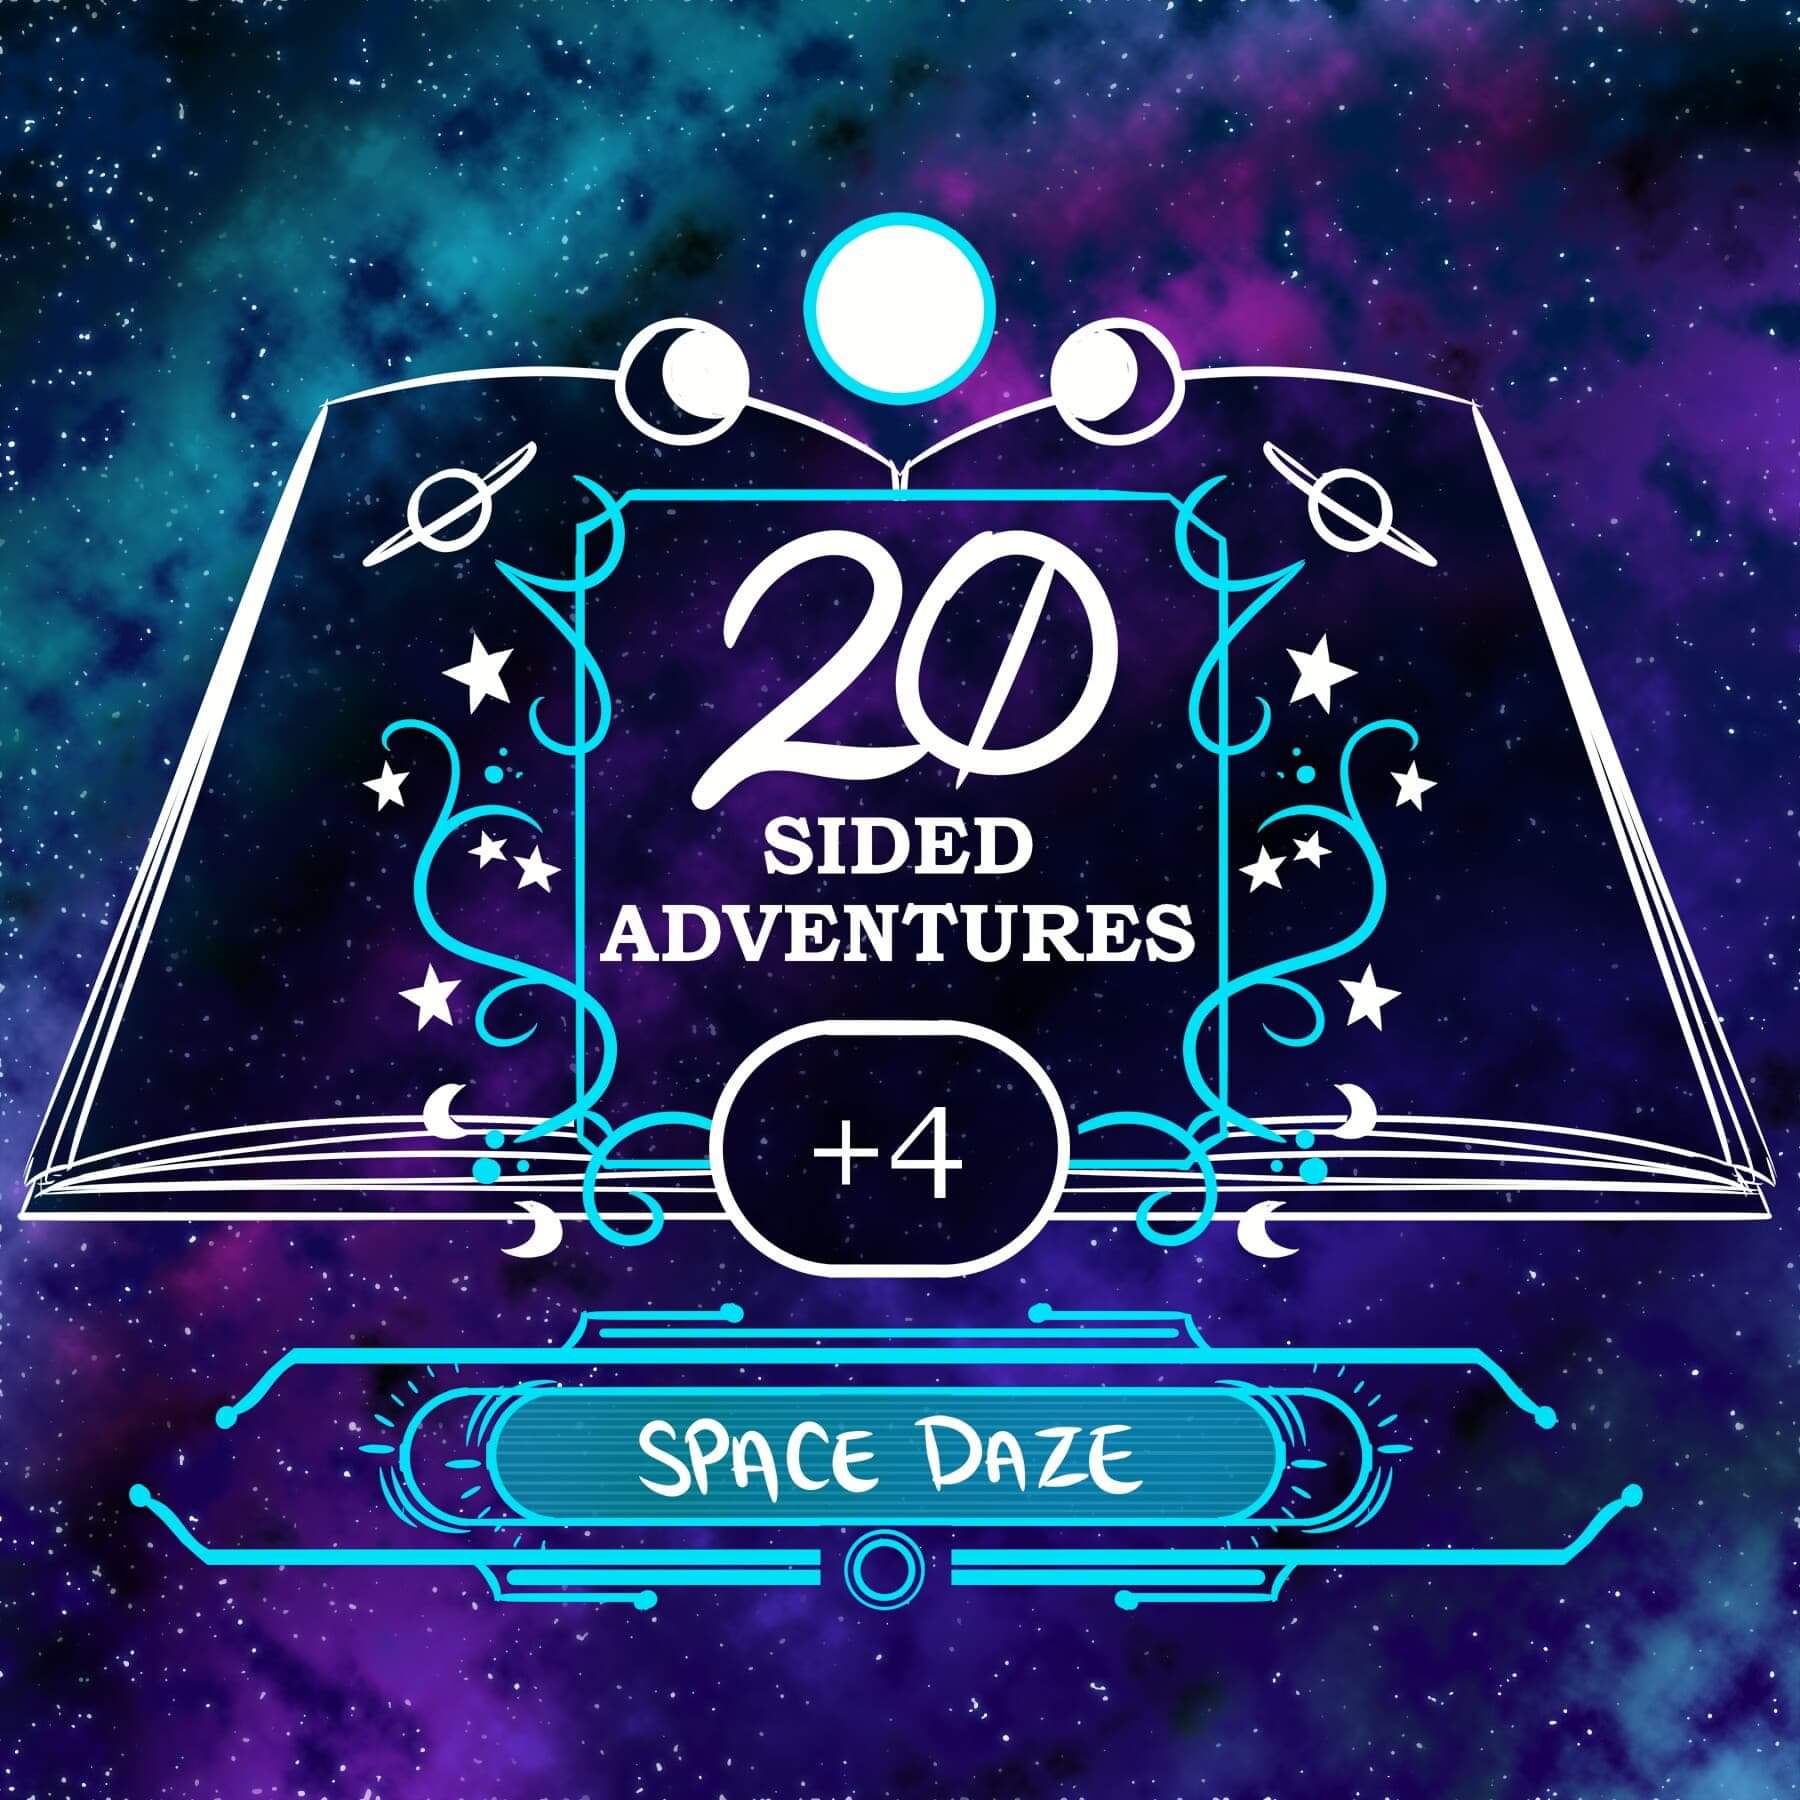 20 Sided Adventures